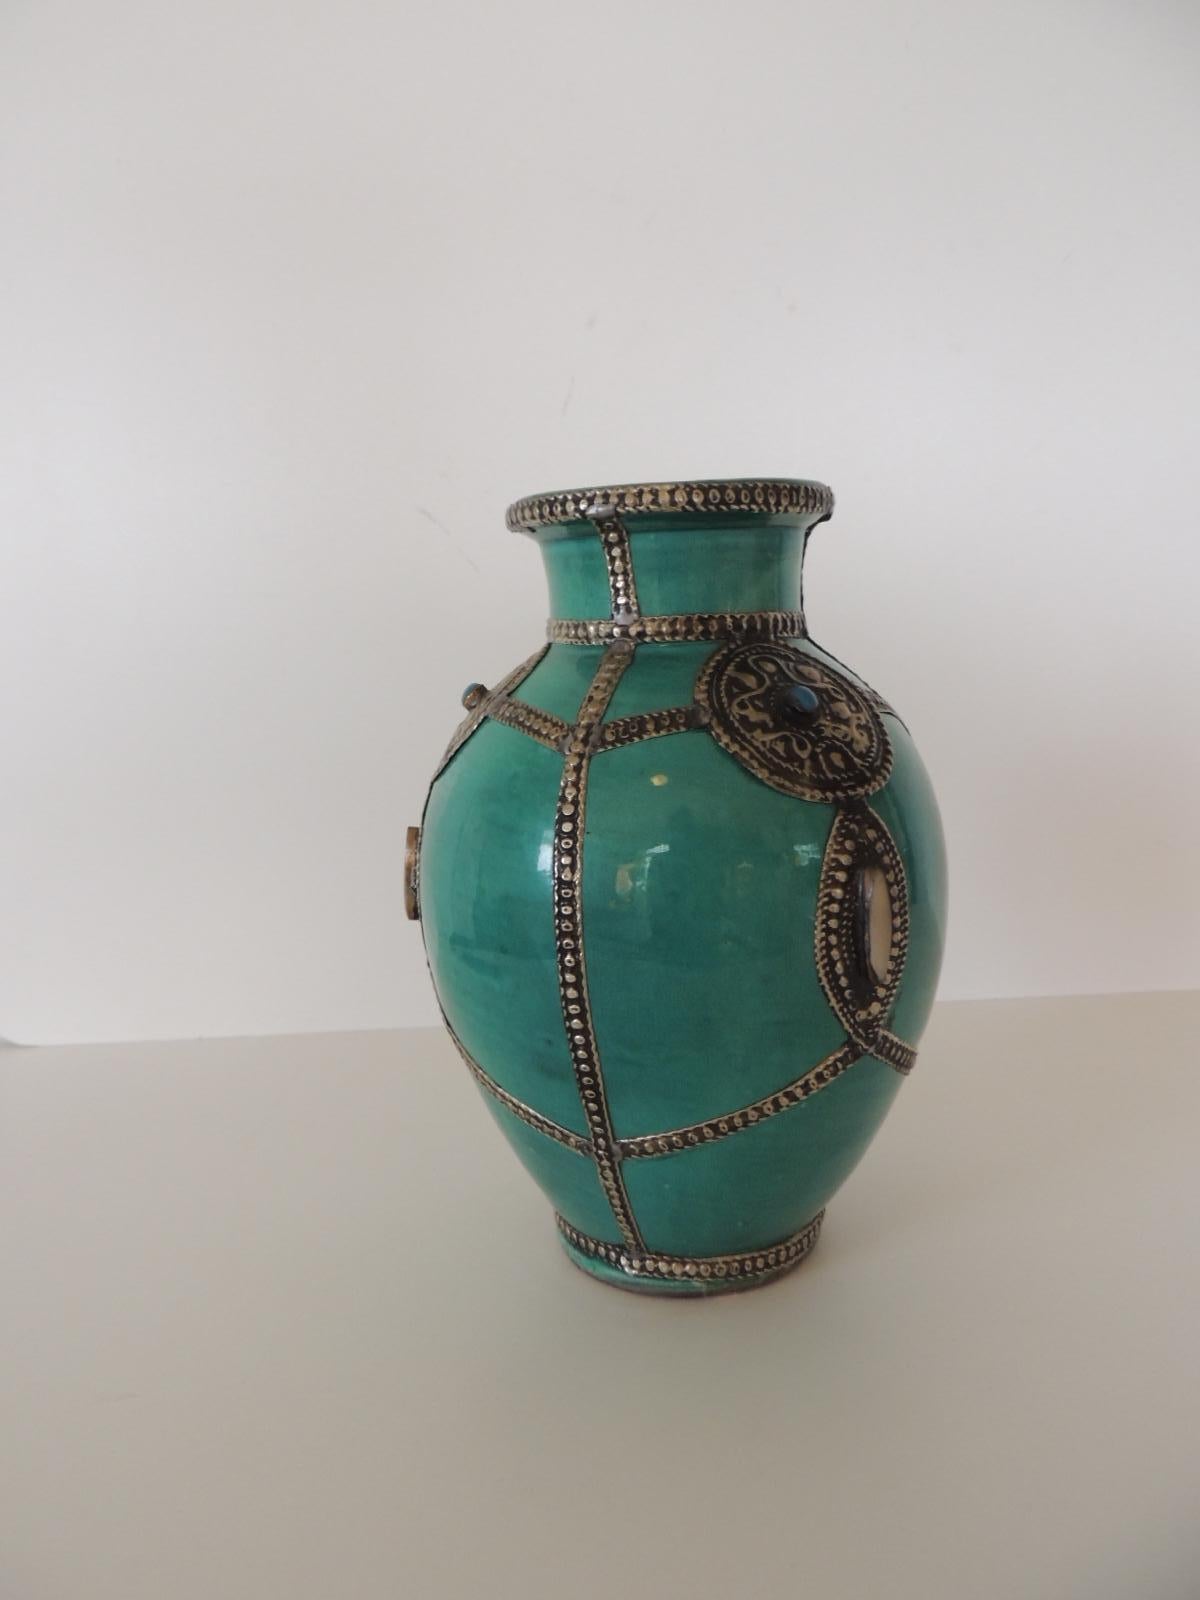 Round Kelly green terracotta Moroccan vase.
Adorned with metal details and faux stones all around.
Size: 6